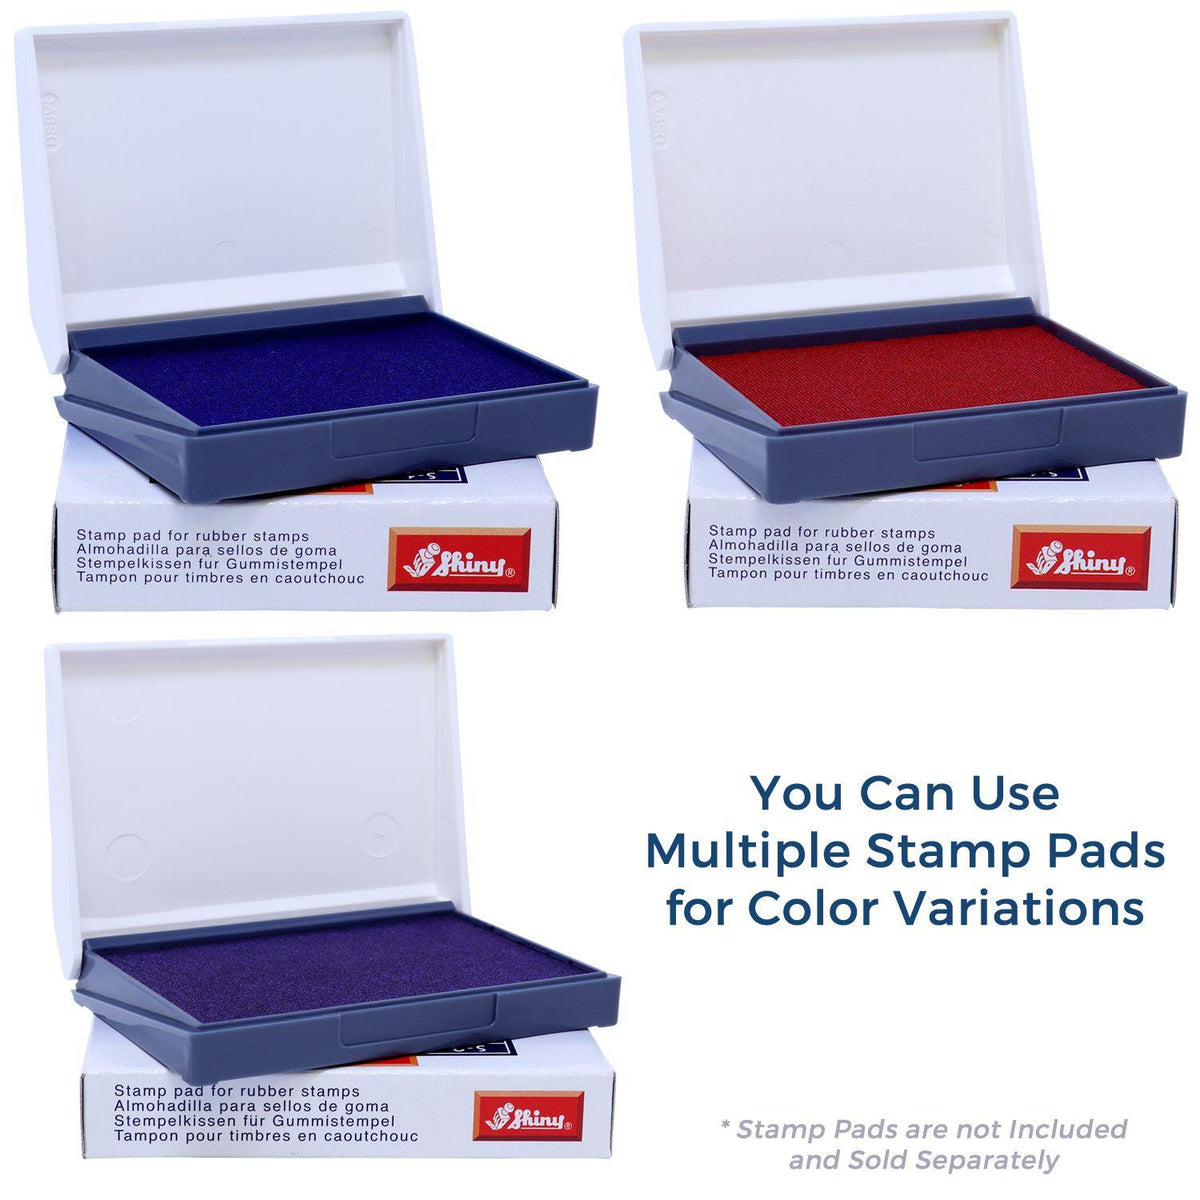 Stamp Pads for Large Broker Copy Rubber Stamp Available